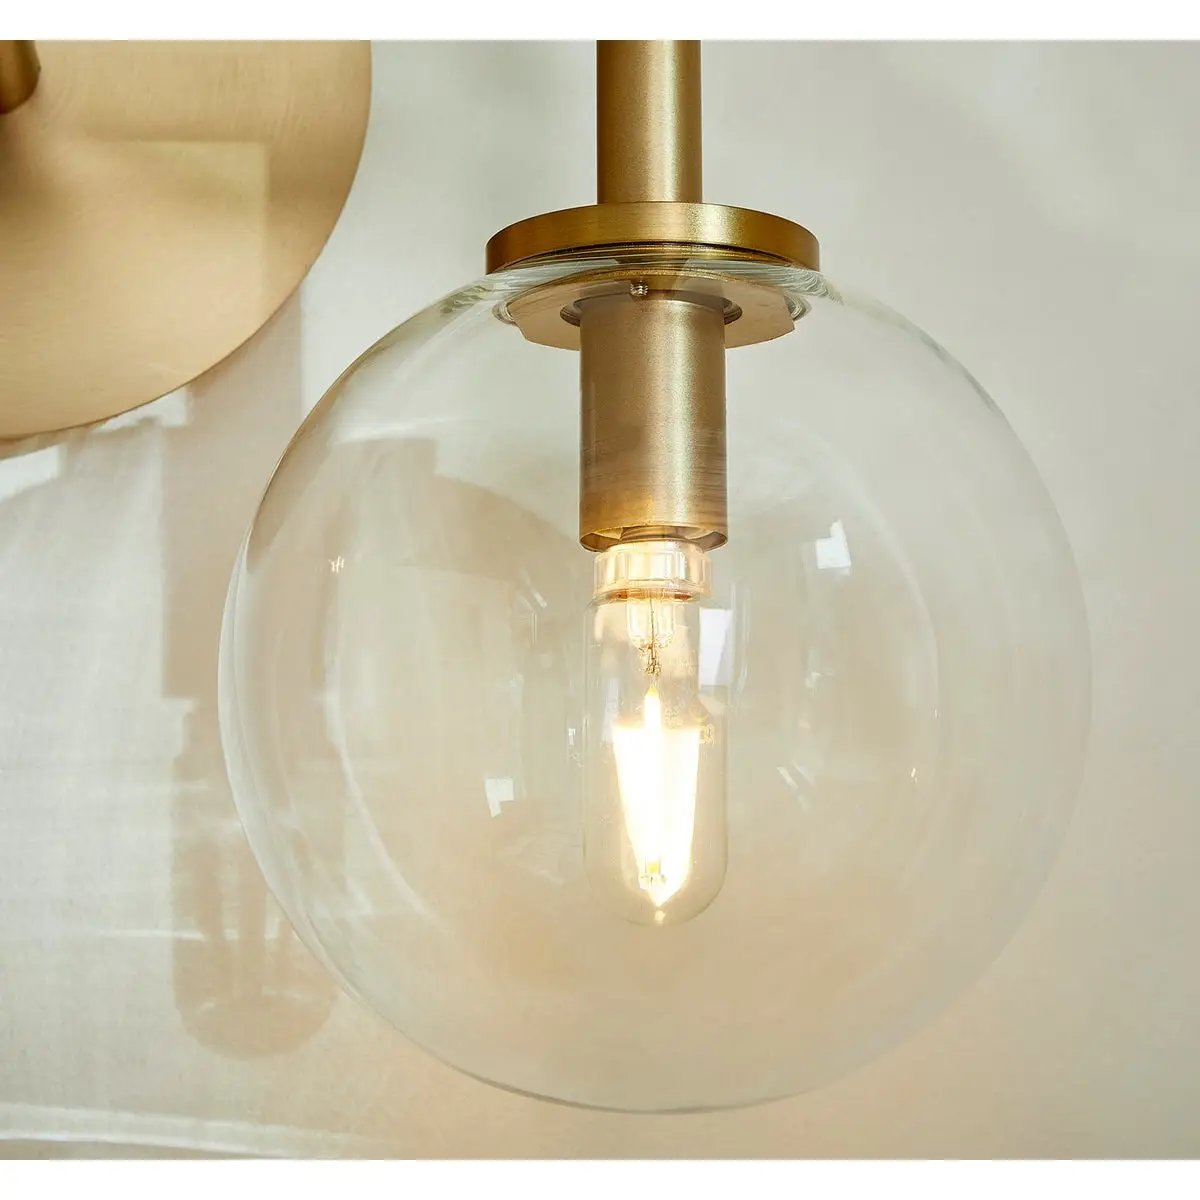 Sputnik Wall Sconce with clear glass domes and aged brass frames, adding mid-century modern appeal. Enhance your environment with this brilliant design.